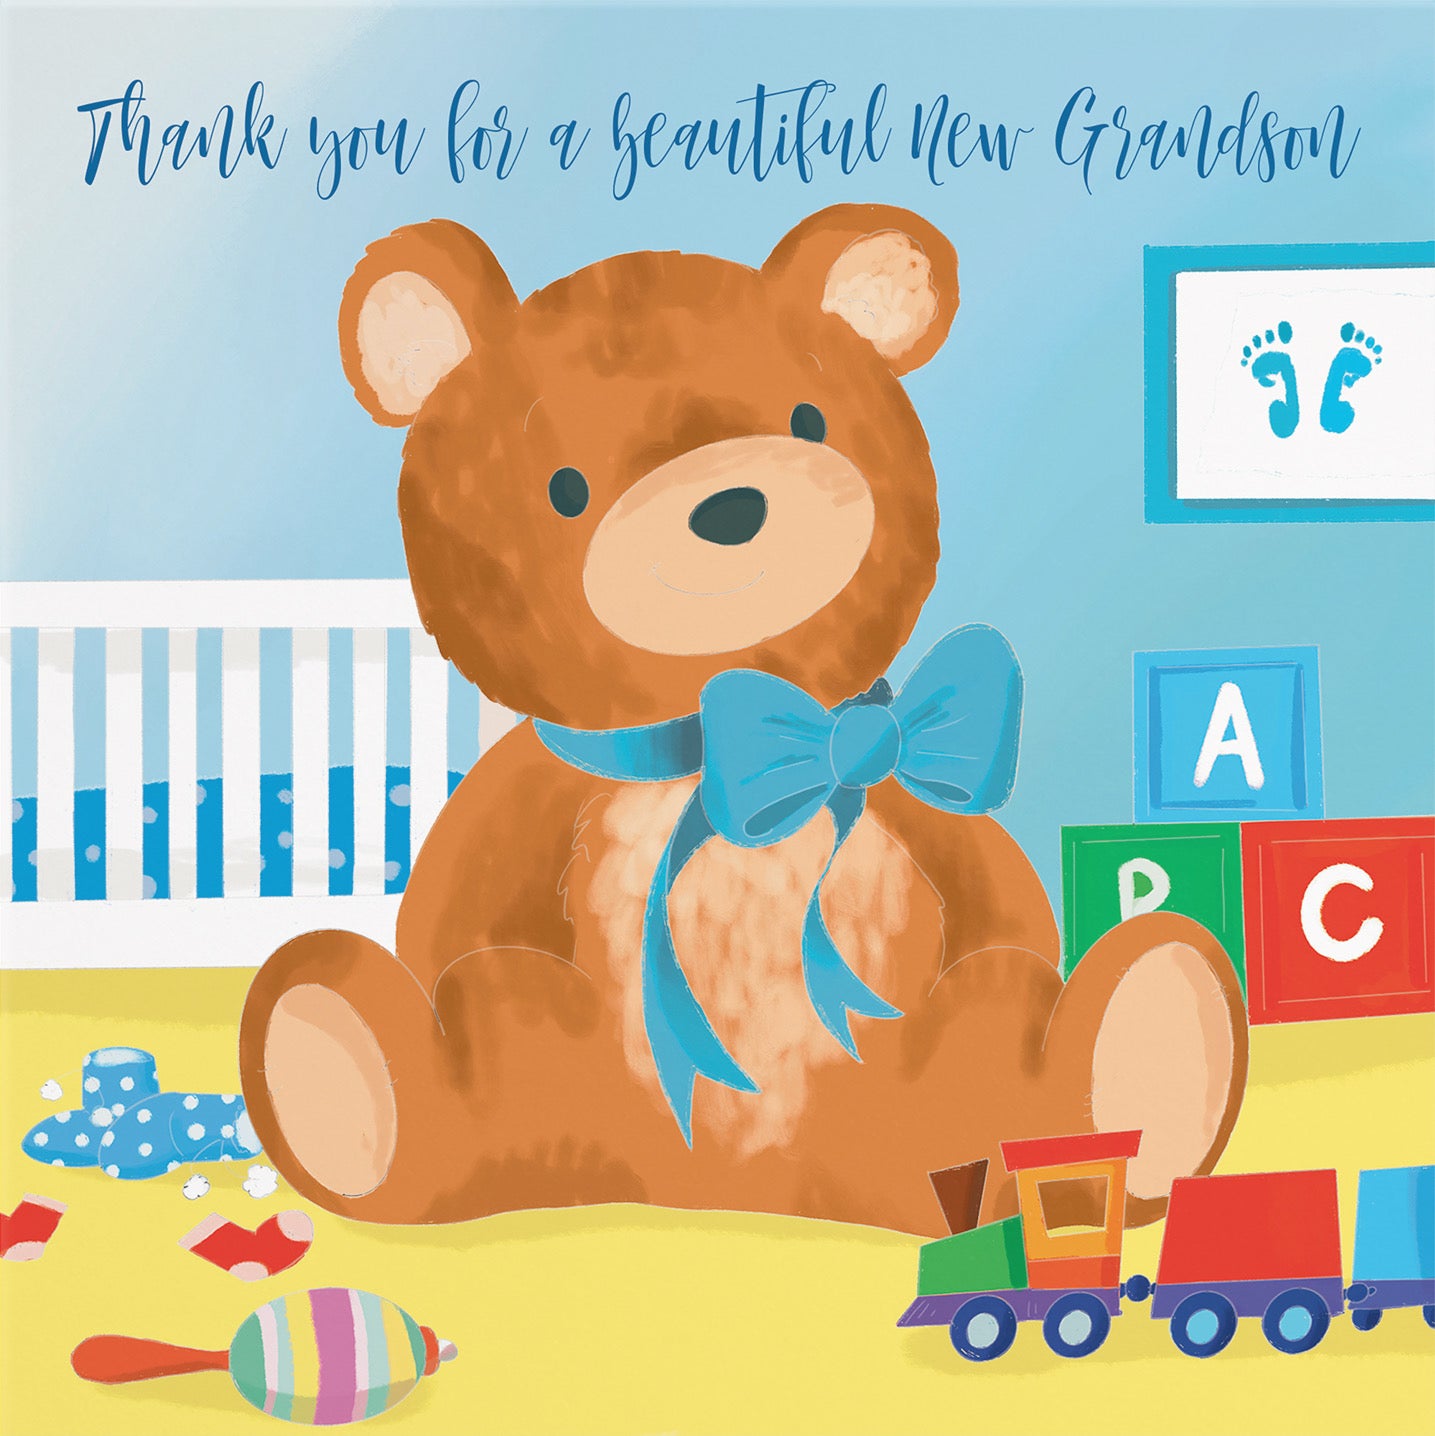 Thank You For A Beautiful New Grandson Card Teddy Bear Classic - Default Title (B09VMWDVHP)